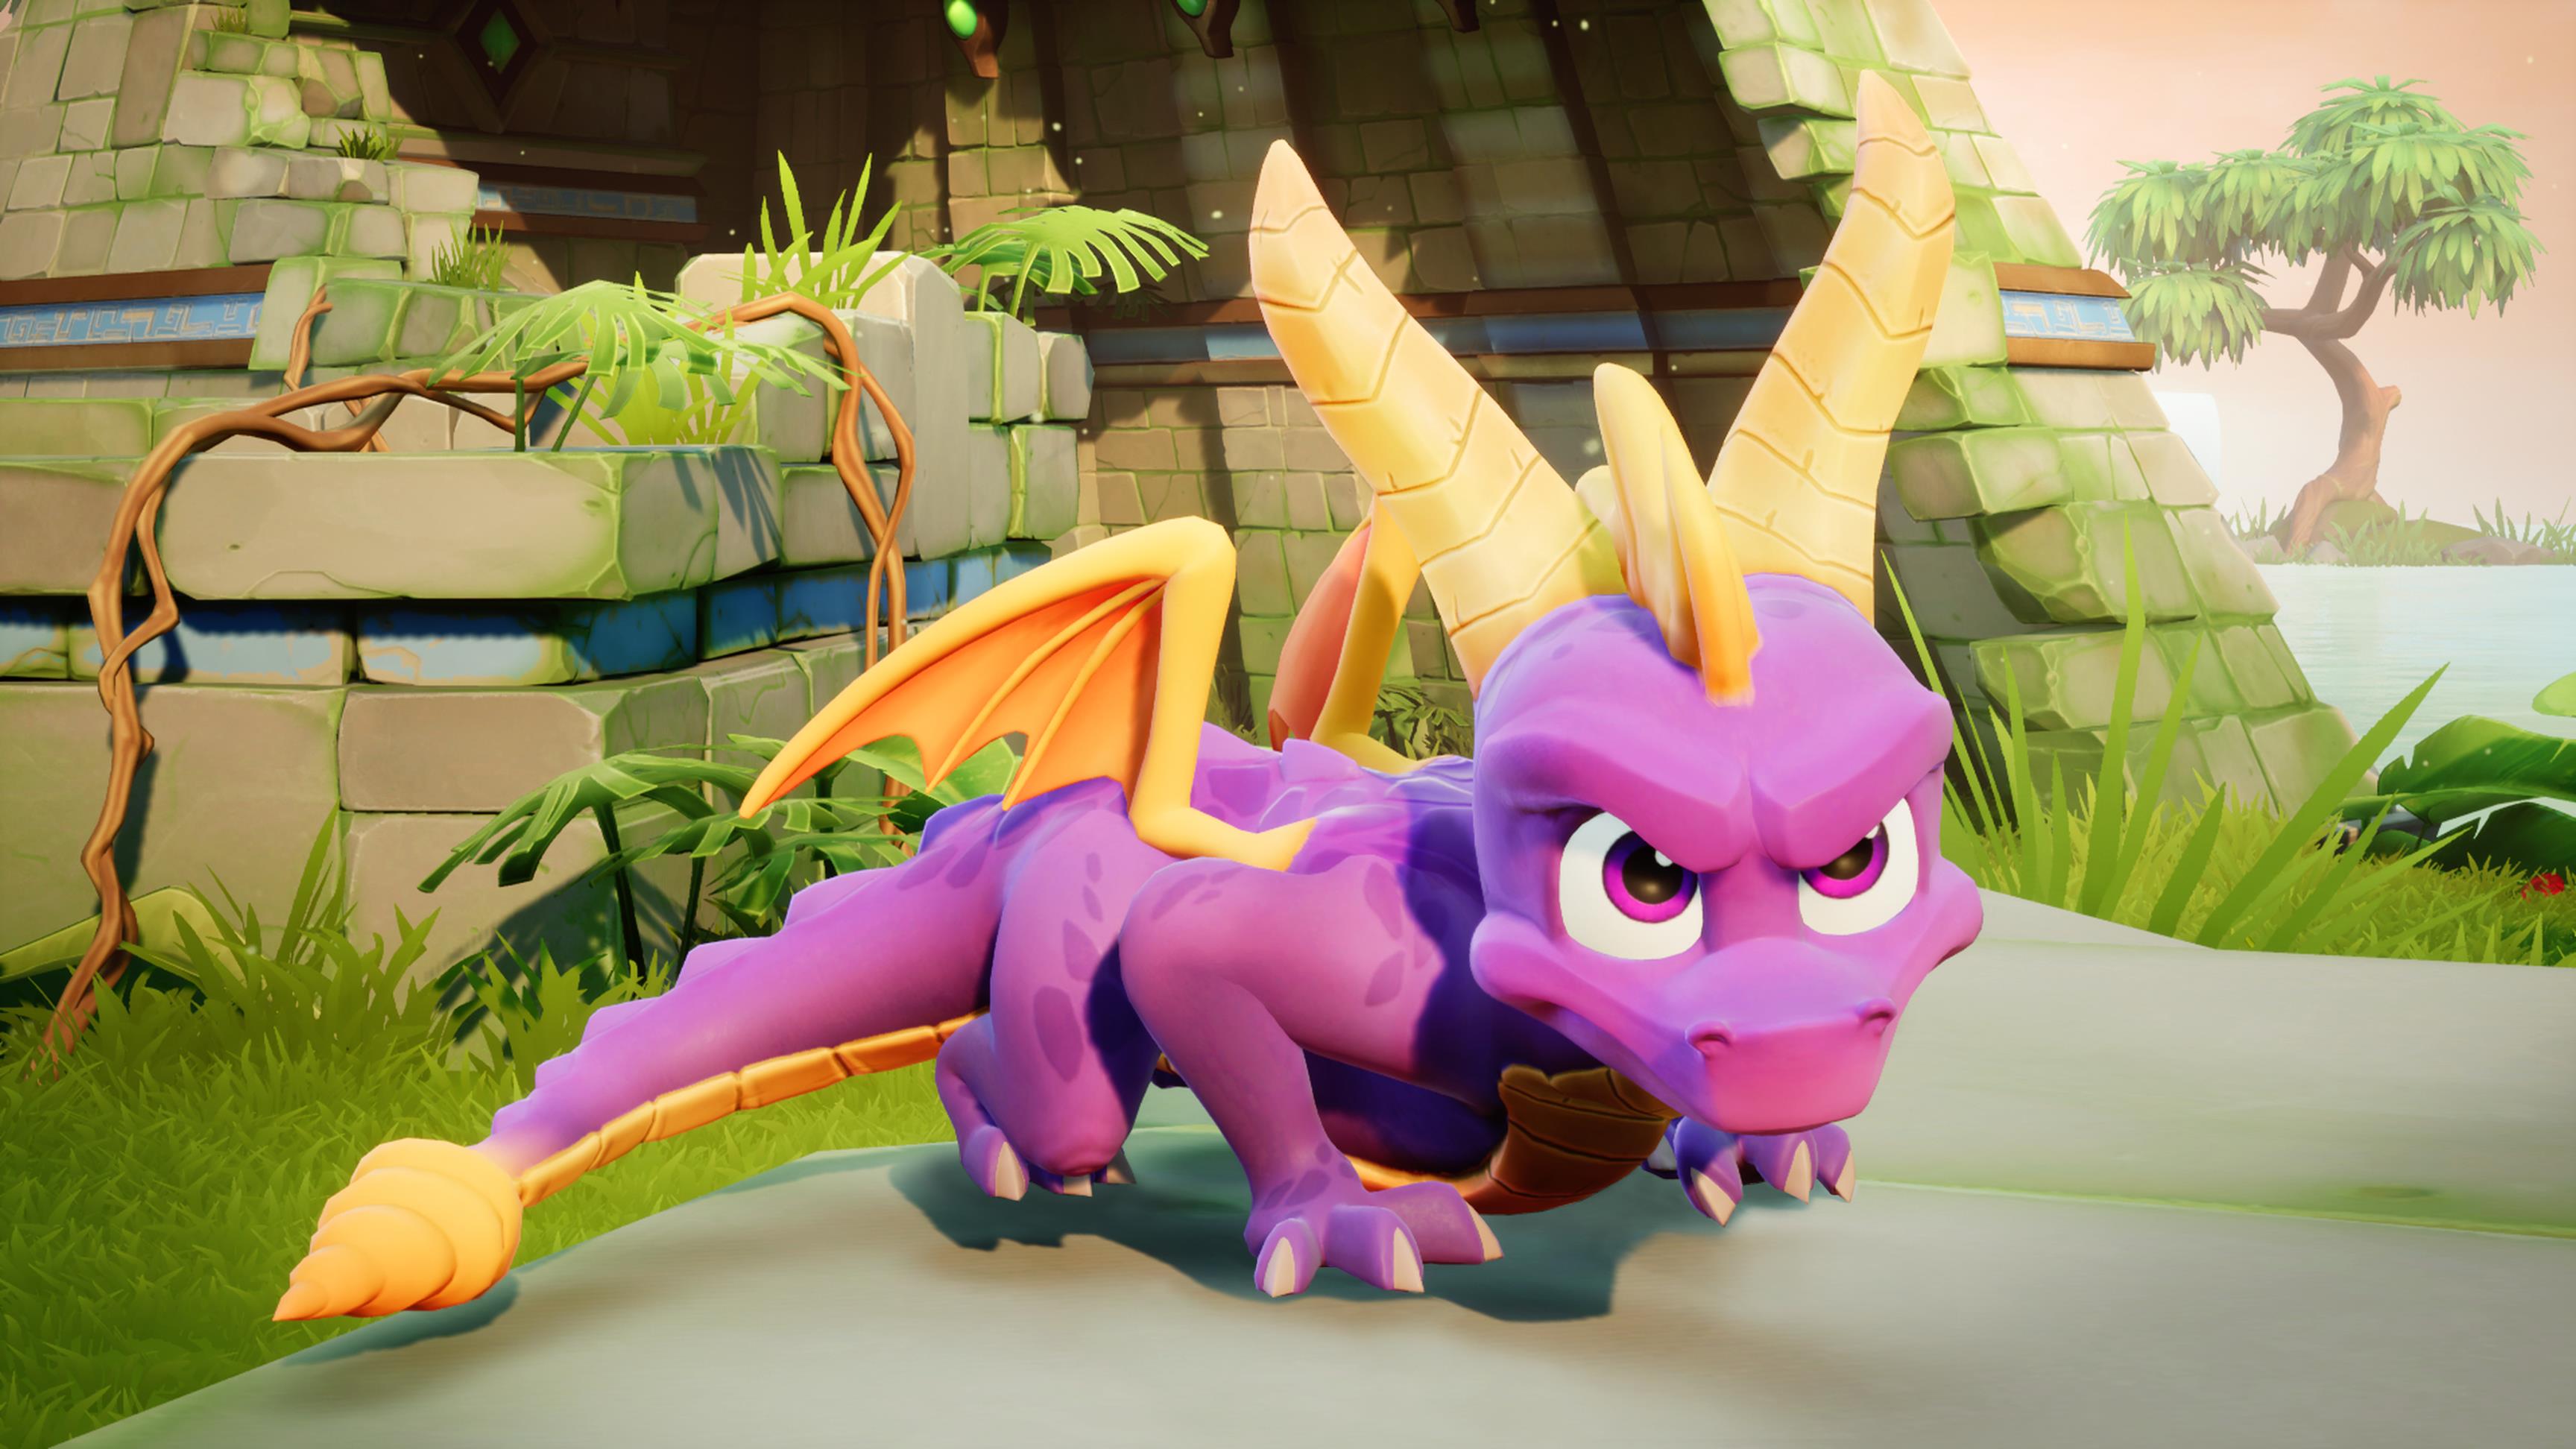 Image for Spyro Reignited Trilogy officially announced, coming to PS4 and Xbox One in September